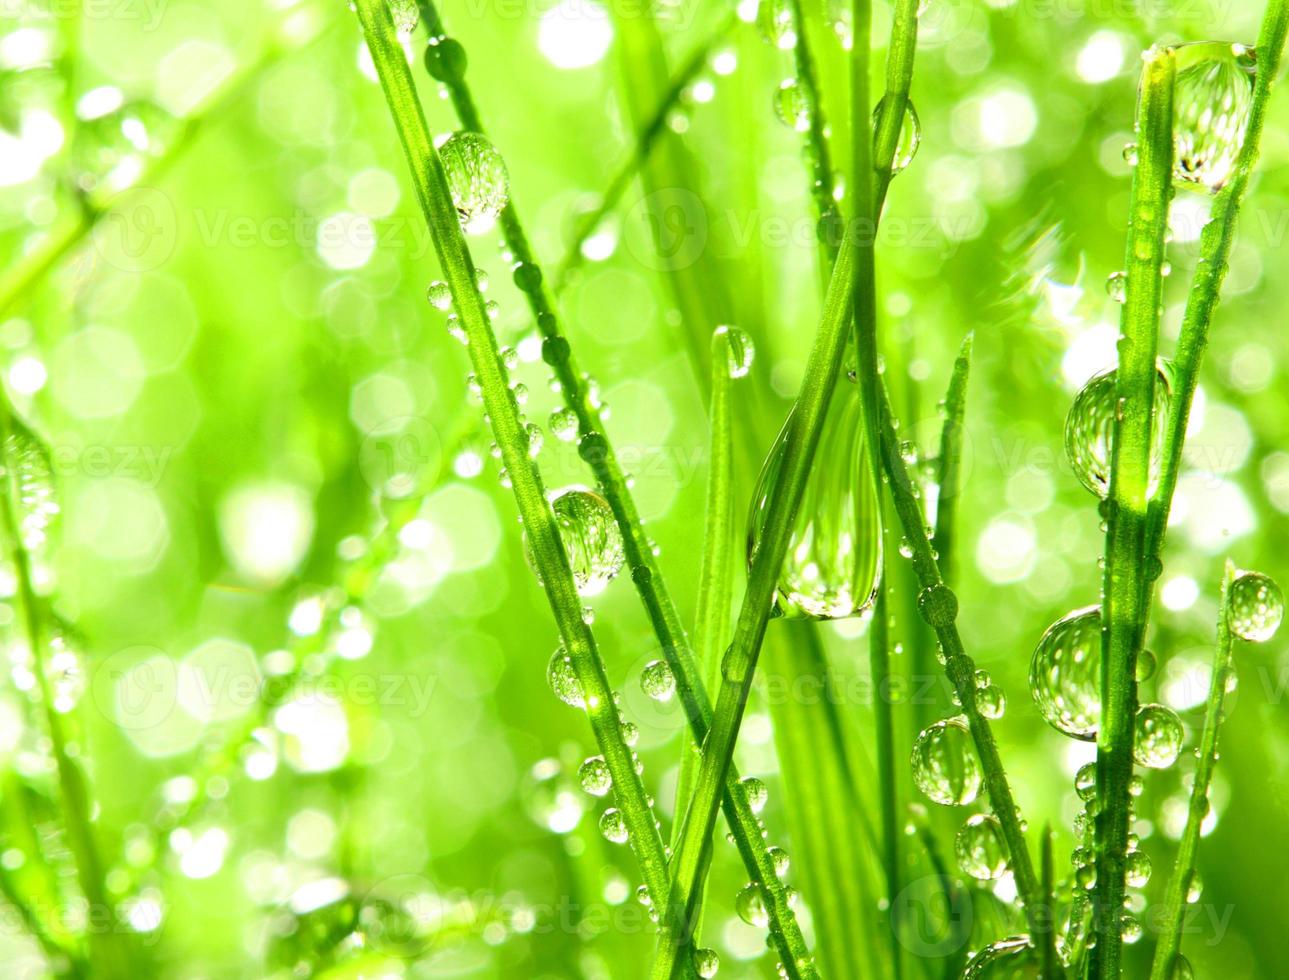 light green fresh leaf sitting on green leaves and dewy grass with nature. photo